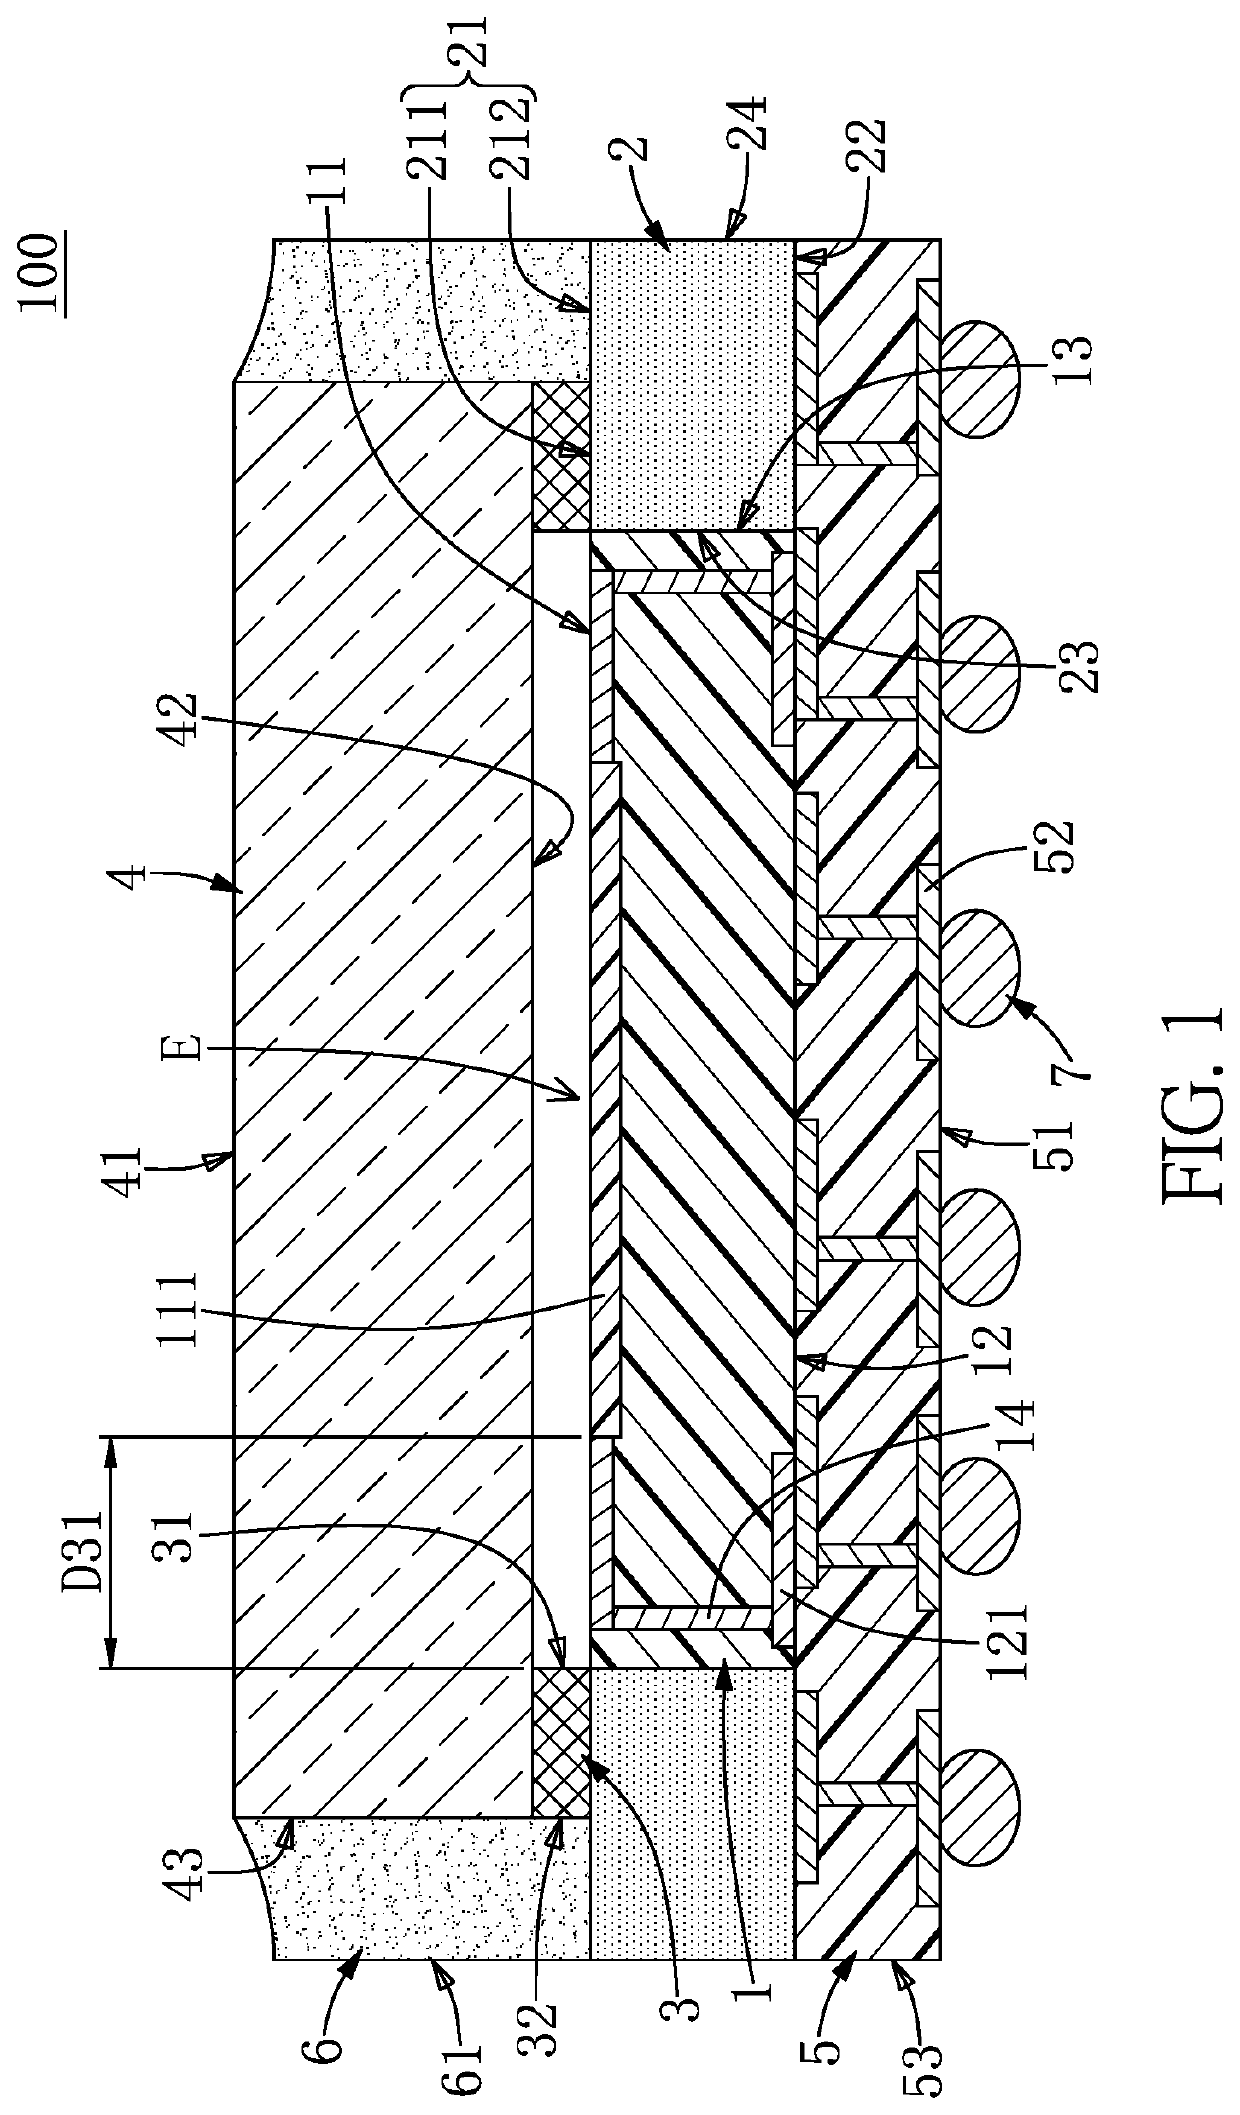 Chip-scale sensor package structure